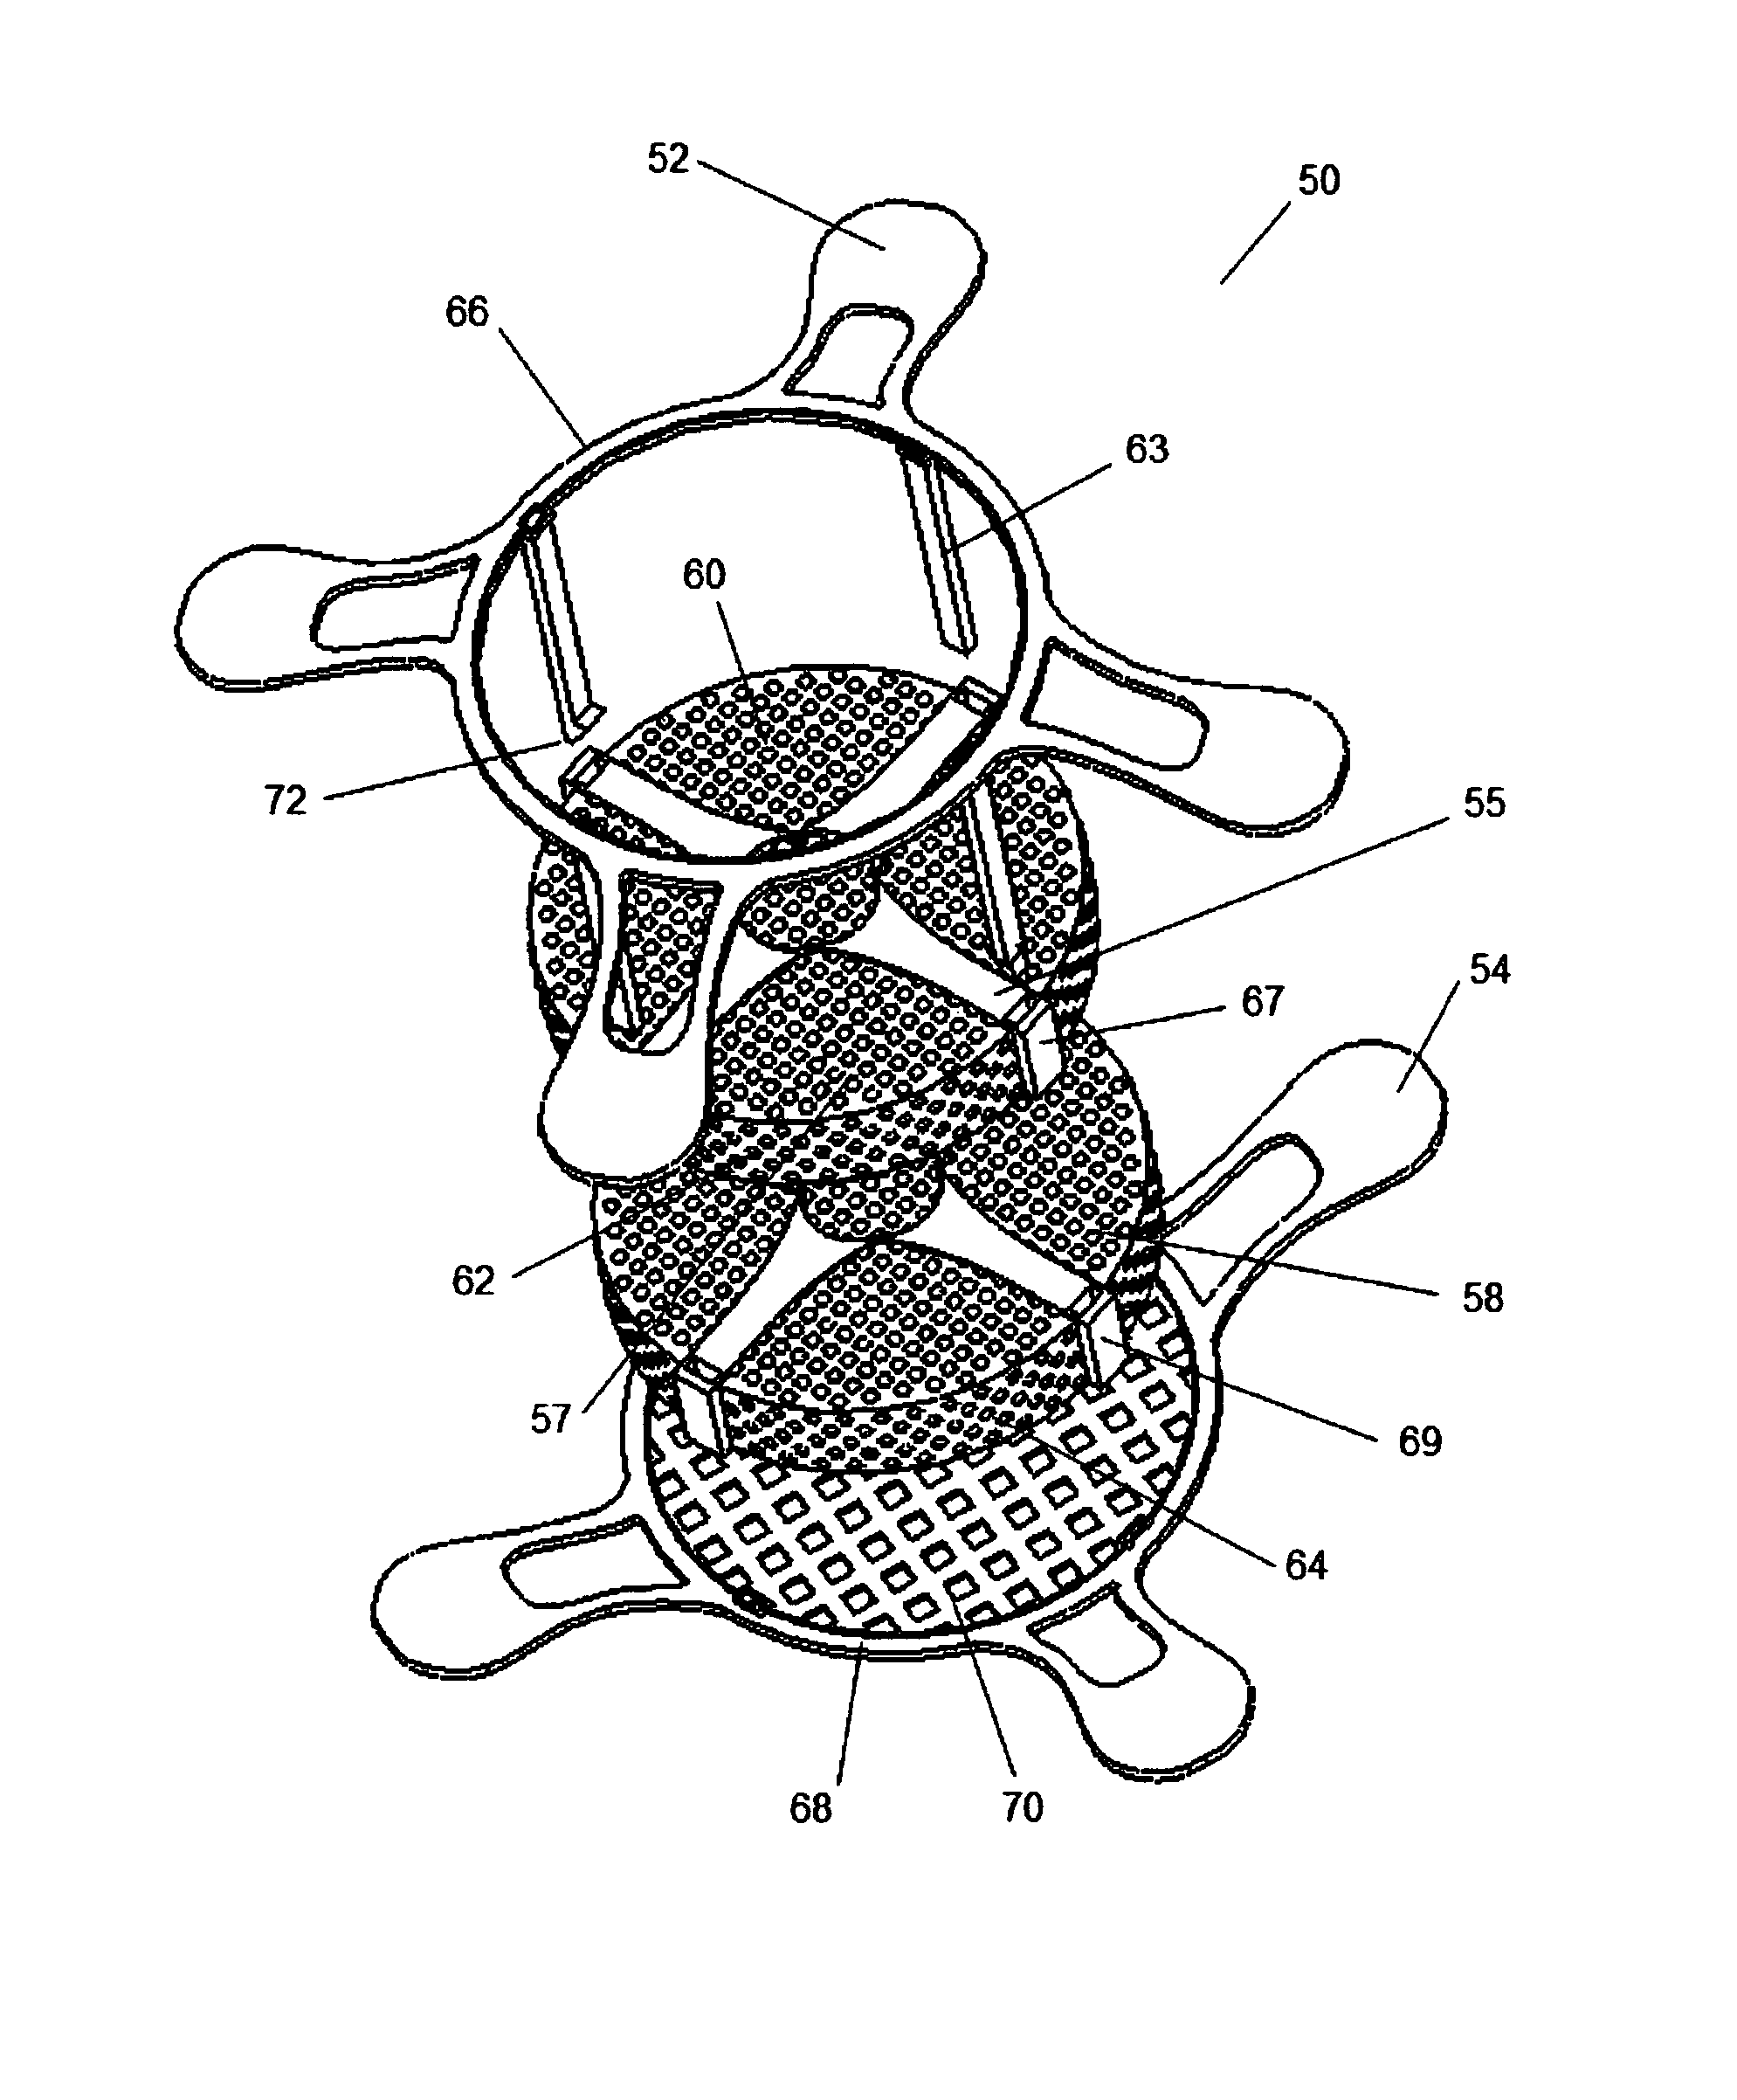 Implantable device for delivery of therapeutic agents